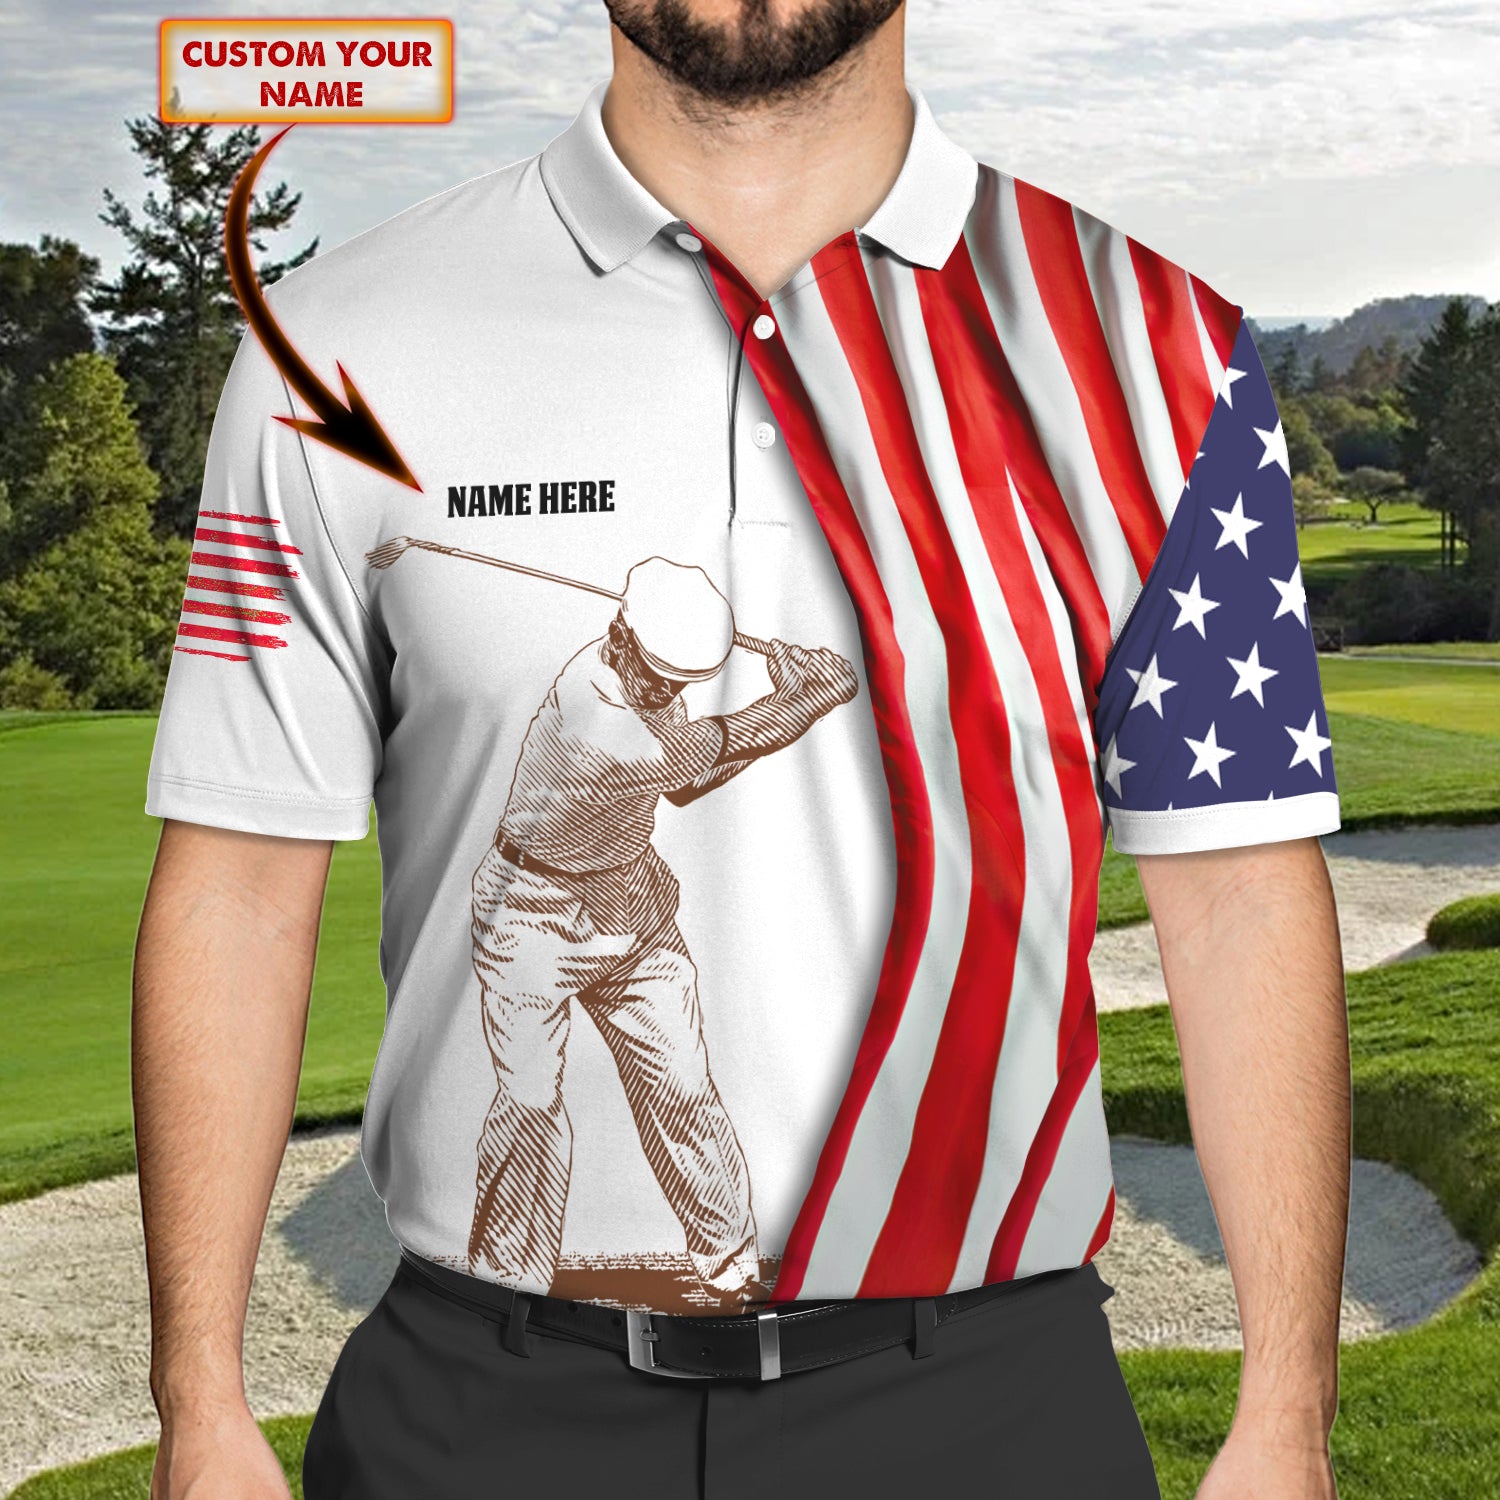 Cigars and Golf02 - Name 3D Polo Shirt - ATM2K